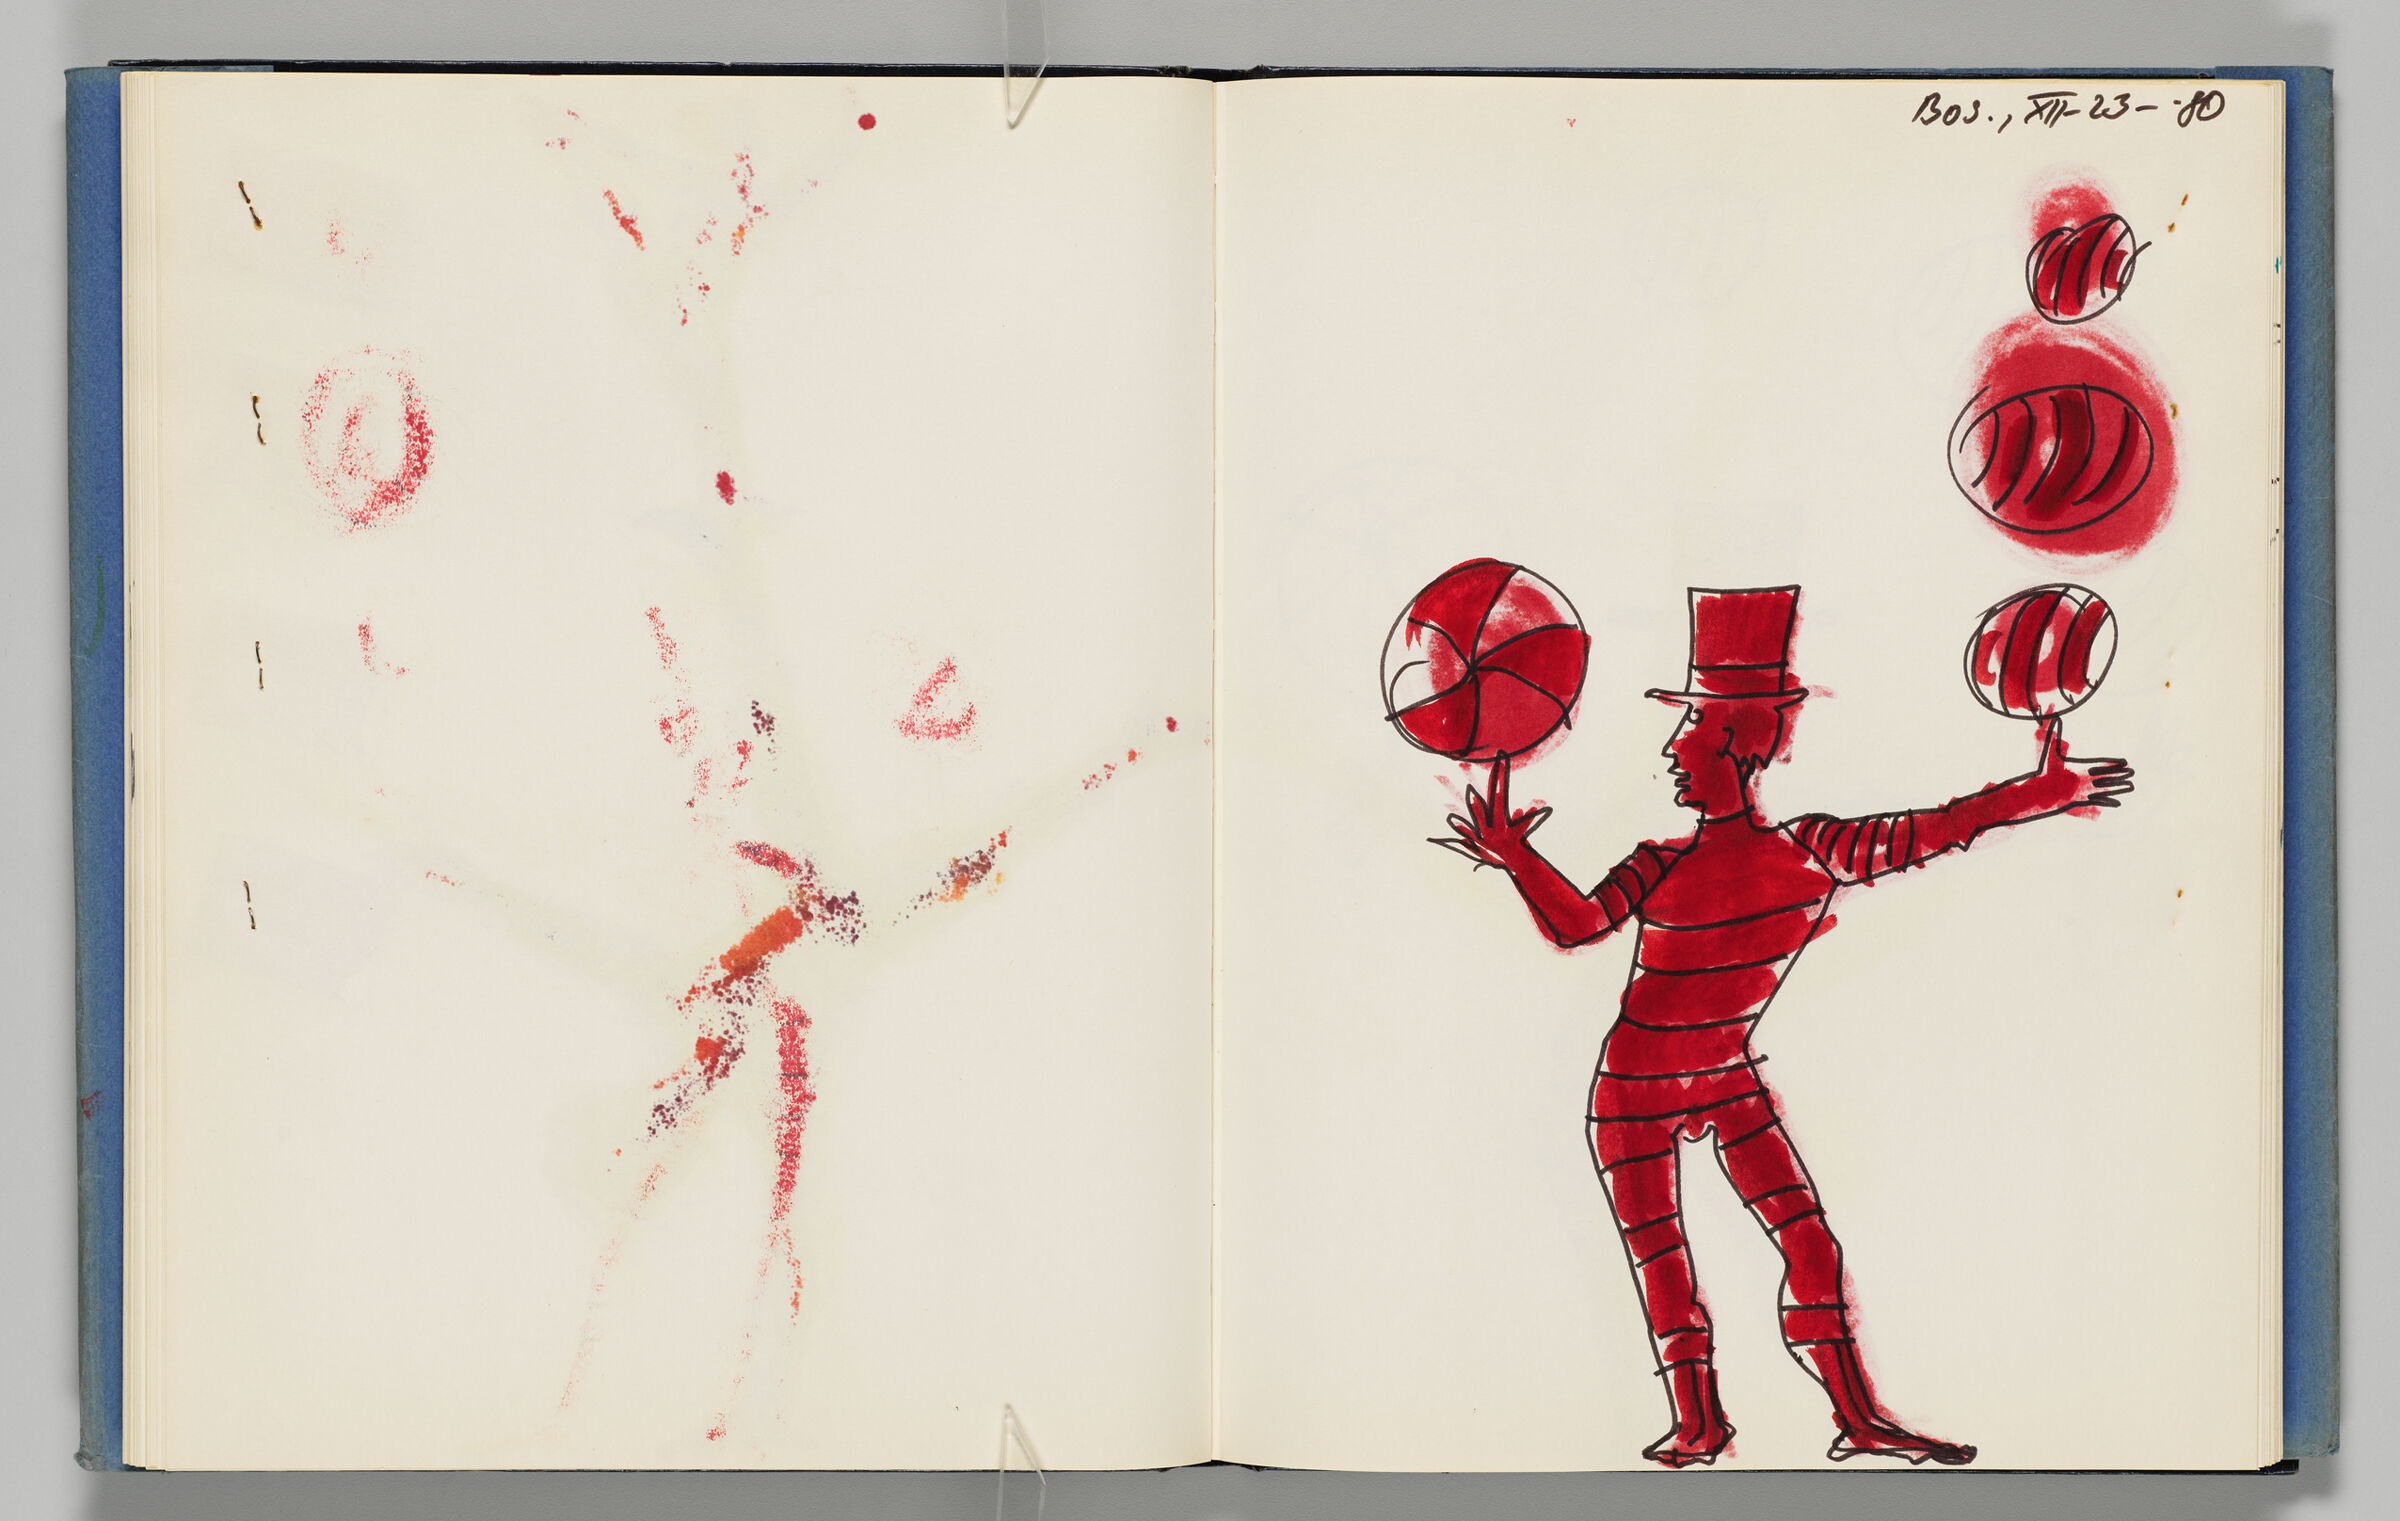 Untitled (Color Transfer, Left Page); Untitled (Juggler Atop Bleed-Through Of Adjacent Page, Right Page)